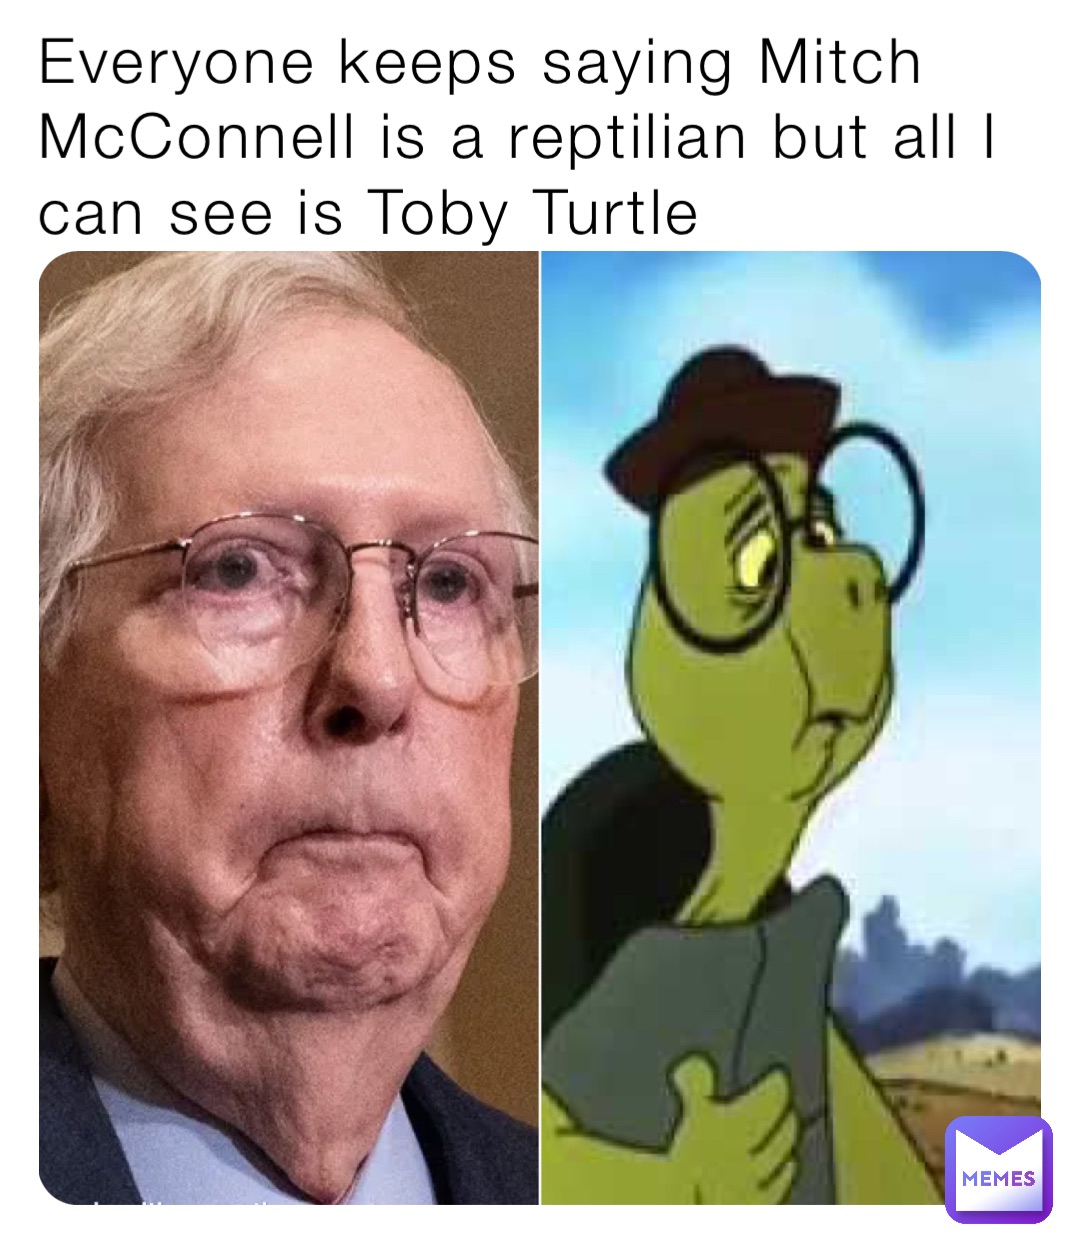 Everyone keeps saying Mitch McConnell is a reptilian but all I can see is Toby Turtle